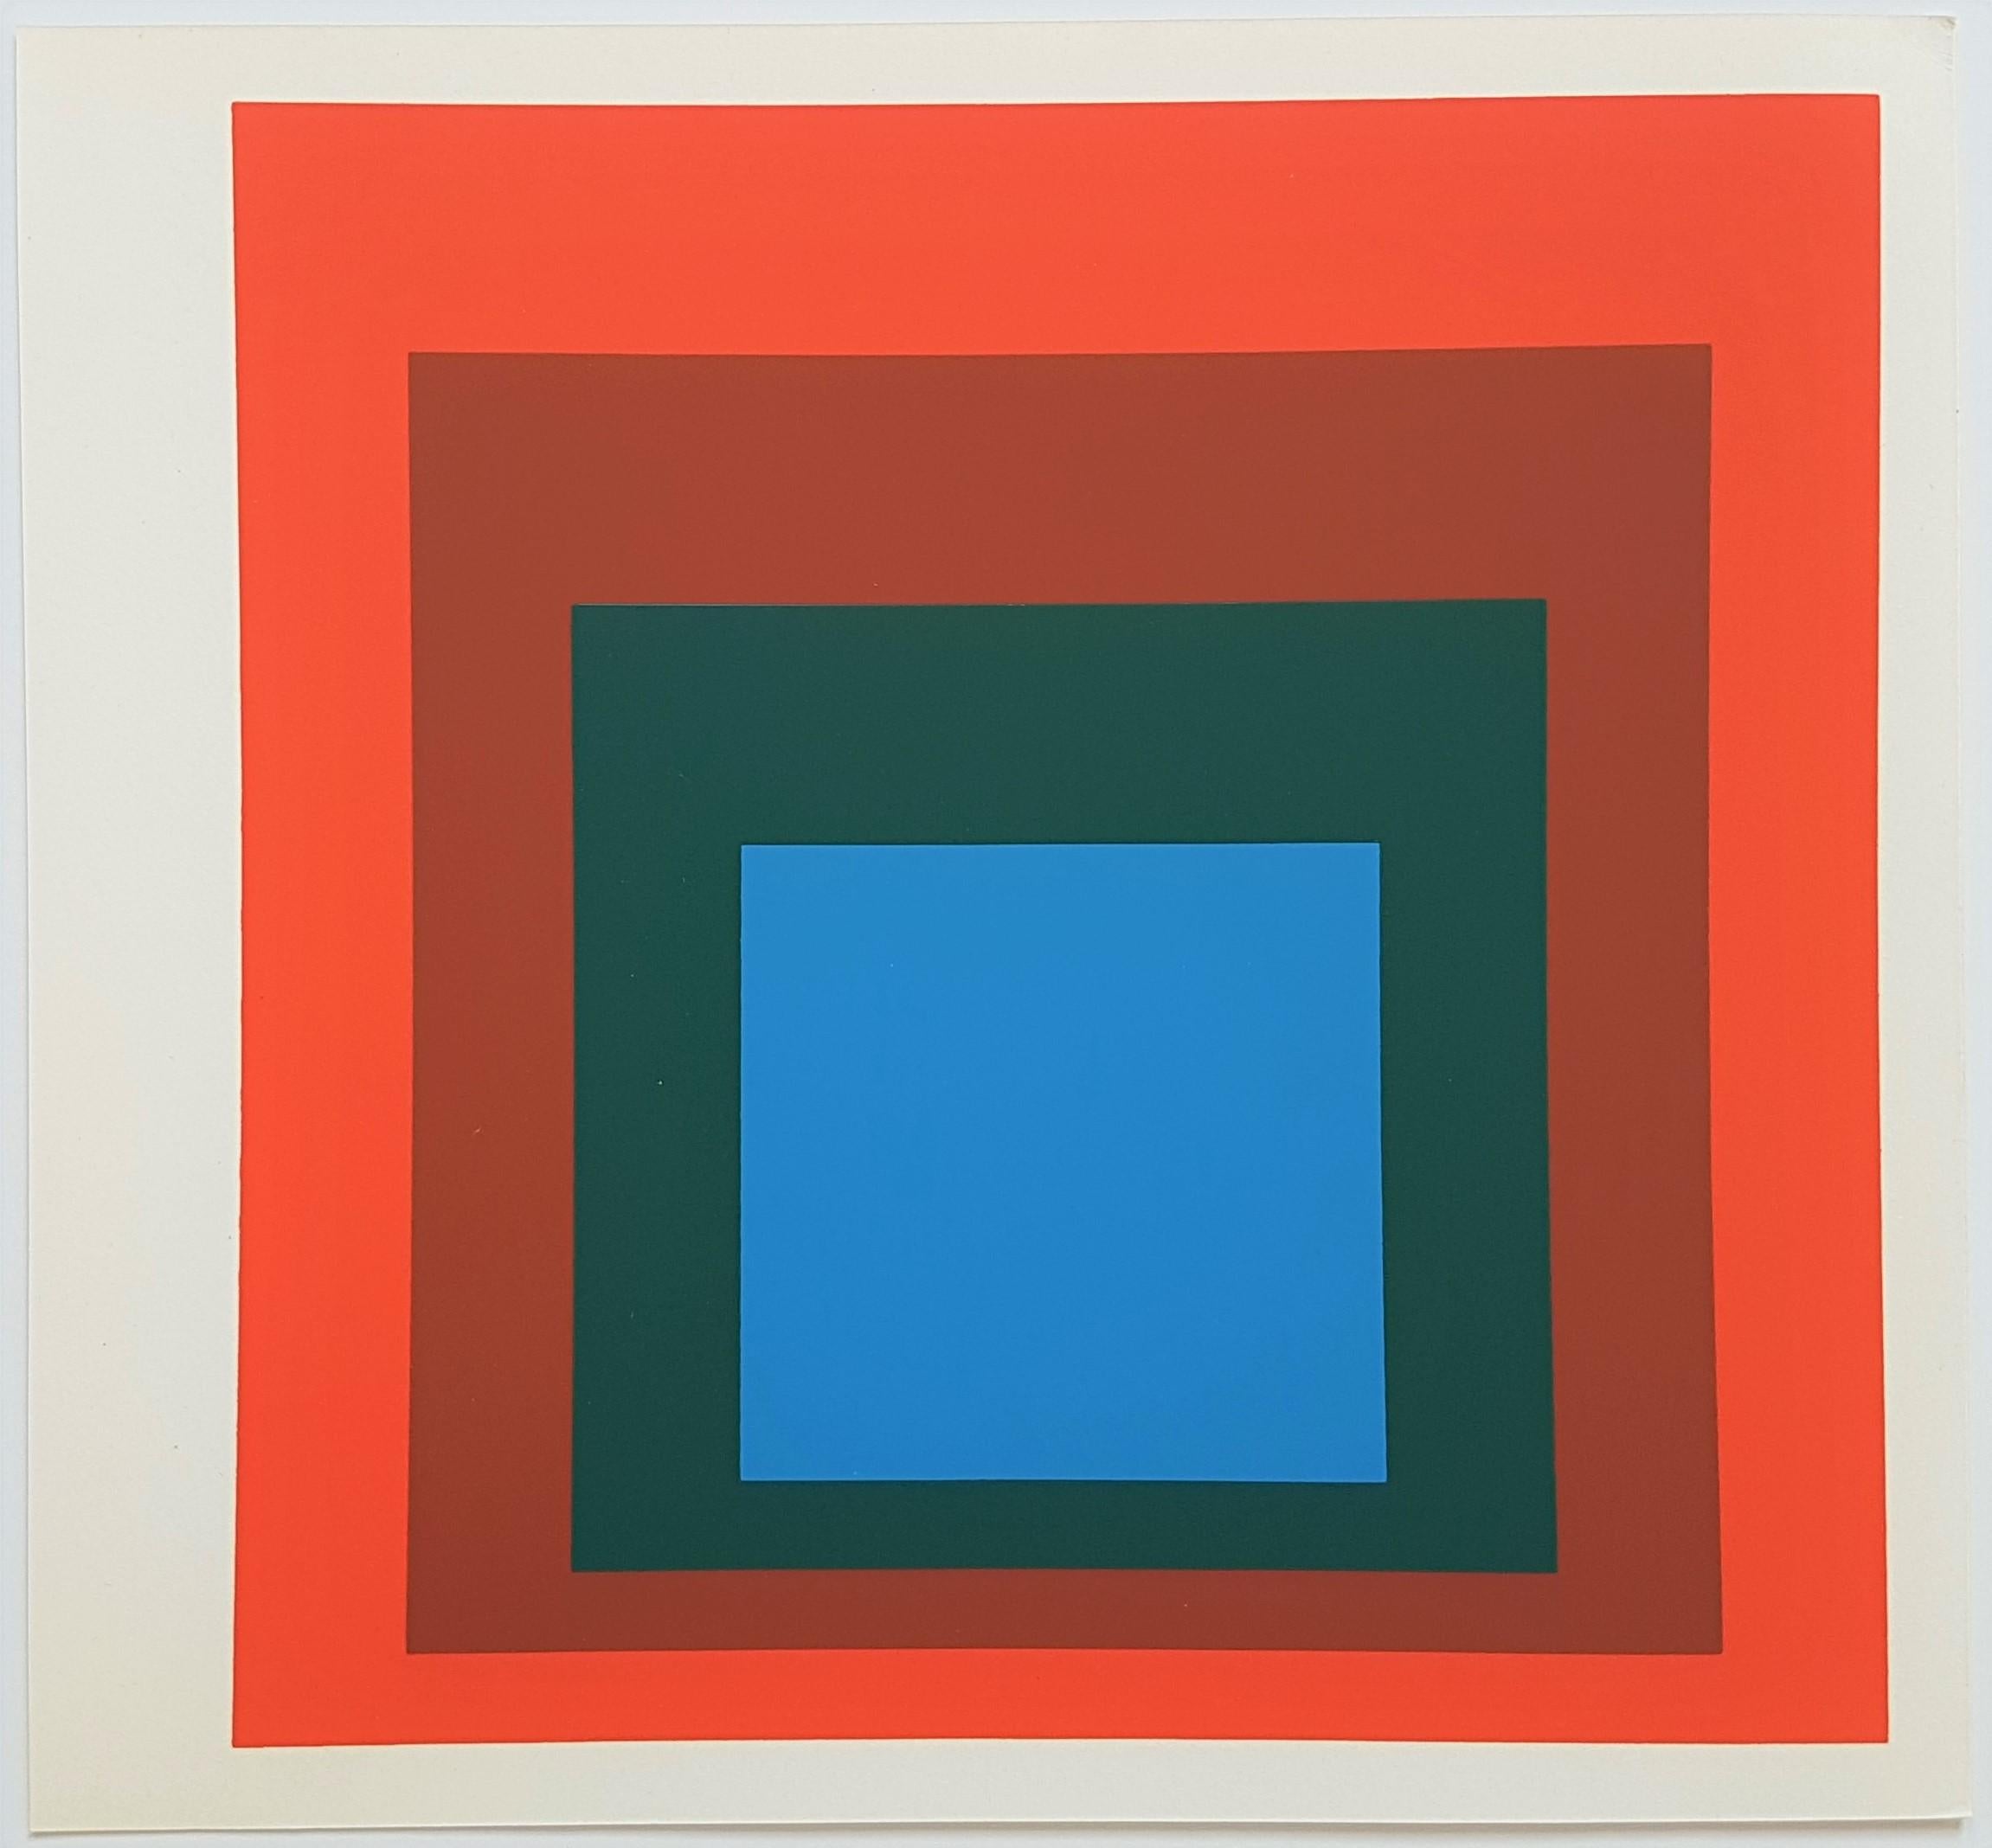 (after) Josef Albers Abstract Print - Homage to the Square: Blue + Darkgreen with 2 Reds (from "Albers")